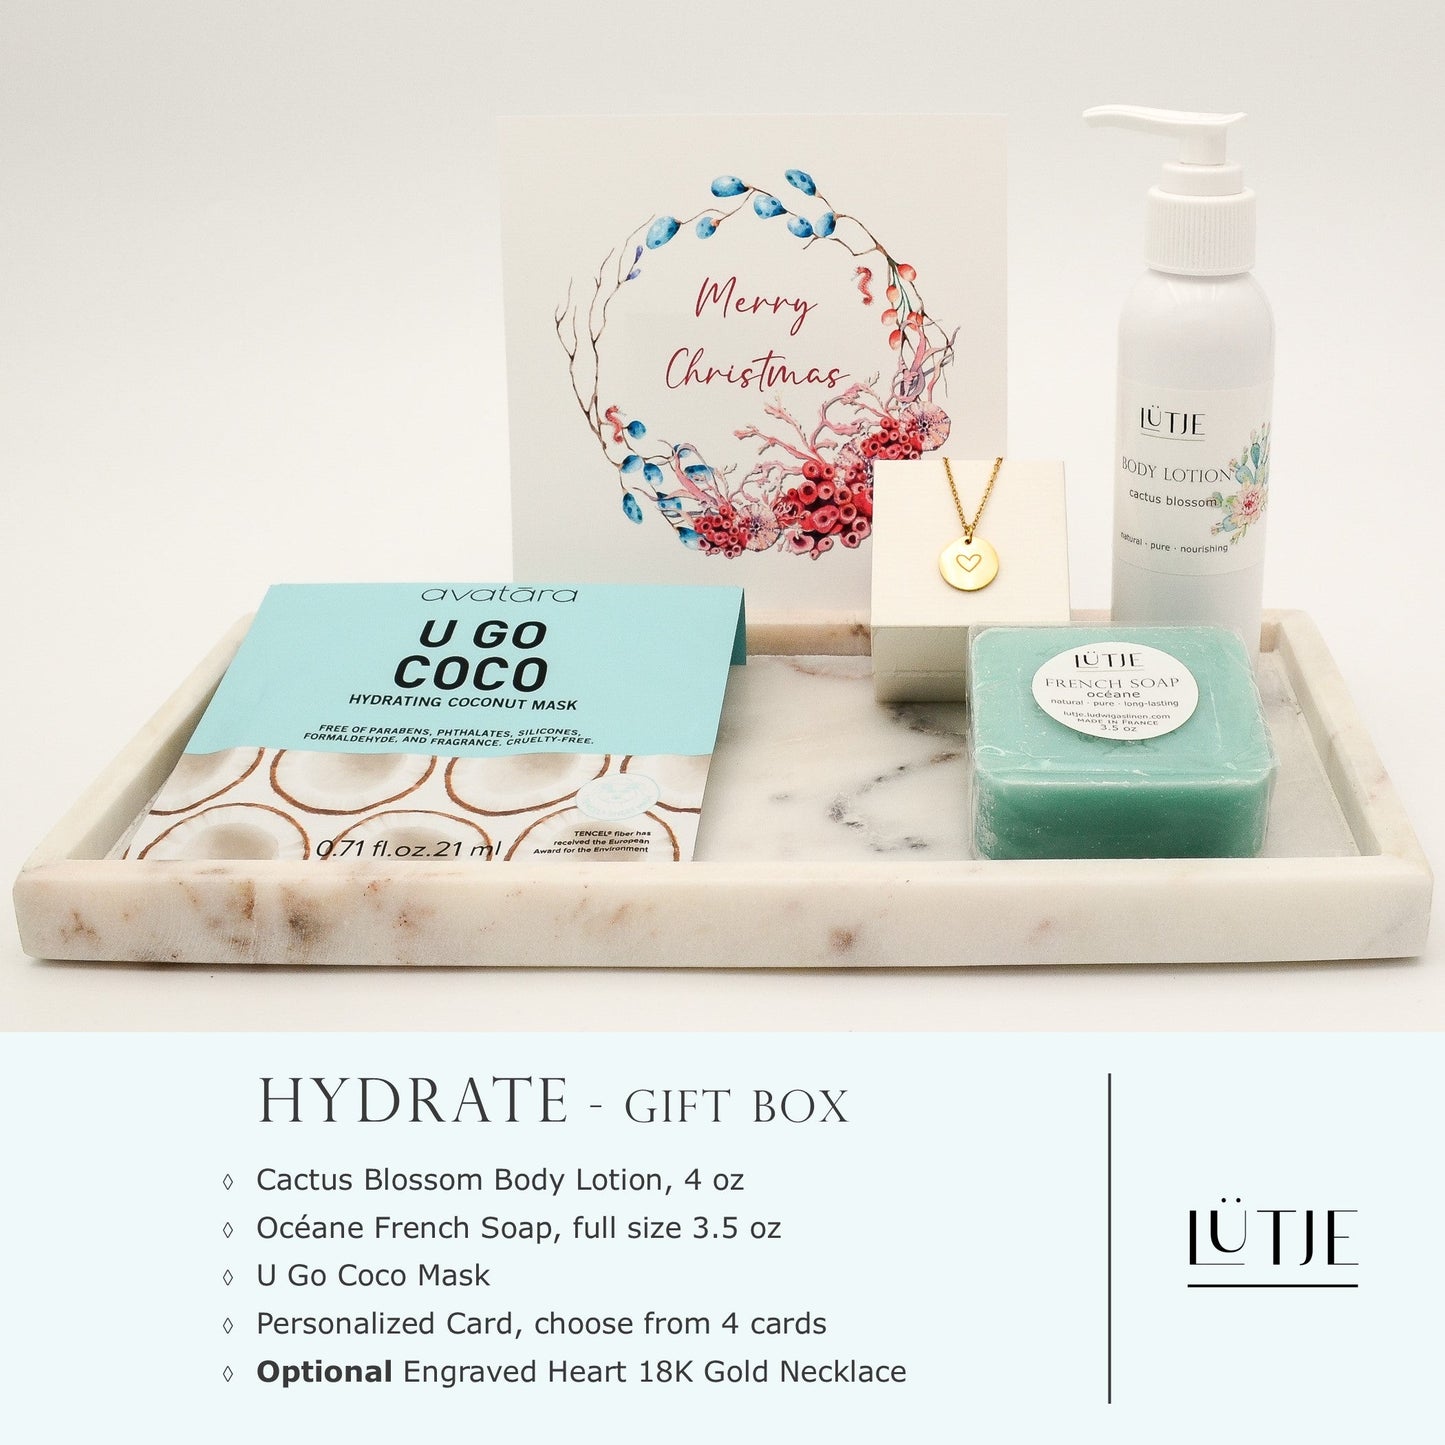 Hydrate Gift Box for women, daughter, mom, BFF, wife, sister or grandma, includes Cactus Blossom body lotion, French soap, hydrating face mask, and 18K gold-plated necklace with engraved heart.